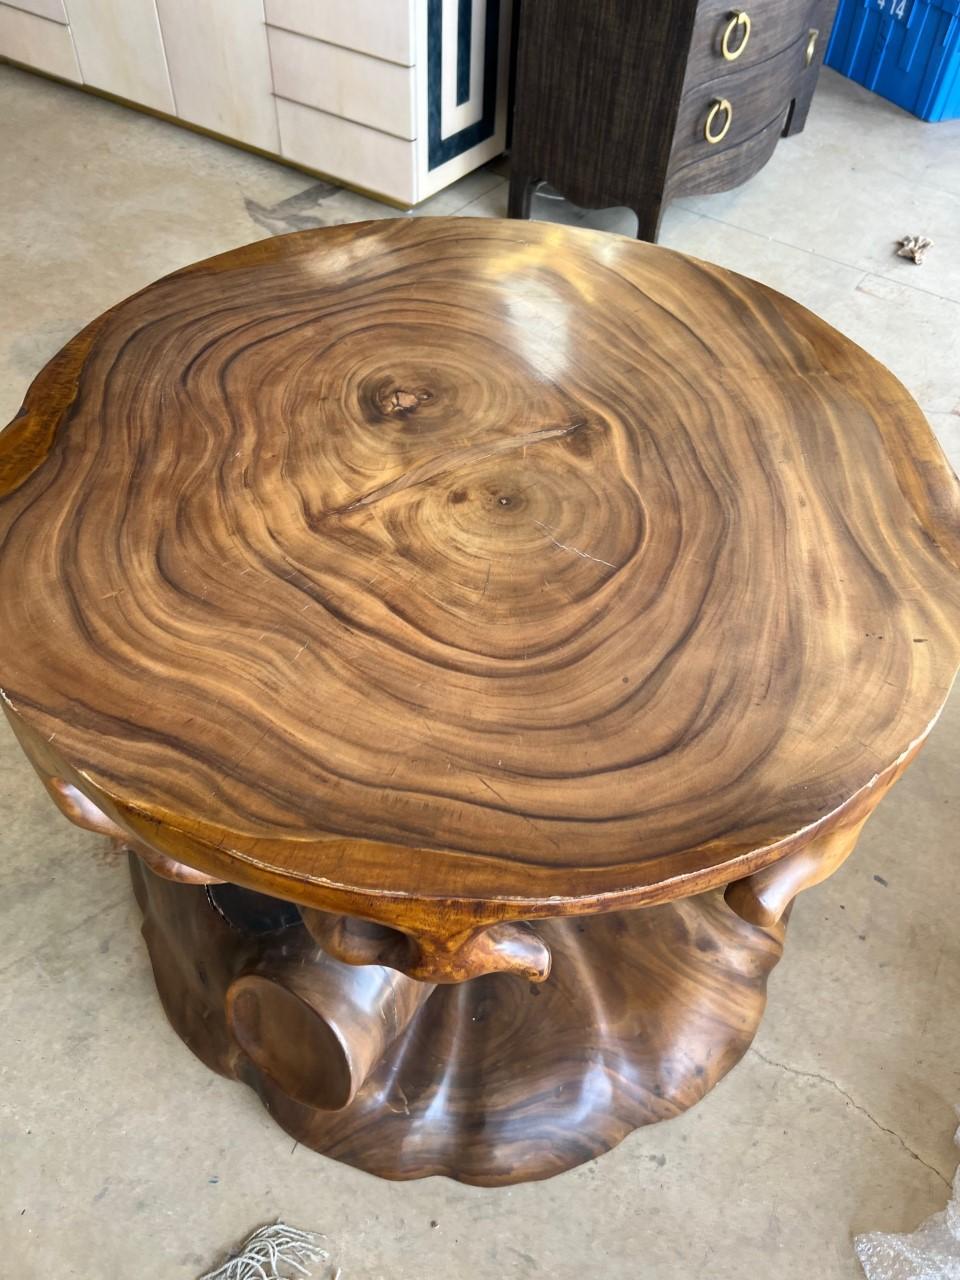 Large and heavy truffle solid wood trunk dining table base and can also be use as side table or pedestal.

A truffle trunk table is a luxury furniture piece made of hand-carved solid wood trunk with a glossy finish light and dark walnut finish. It